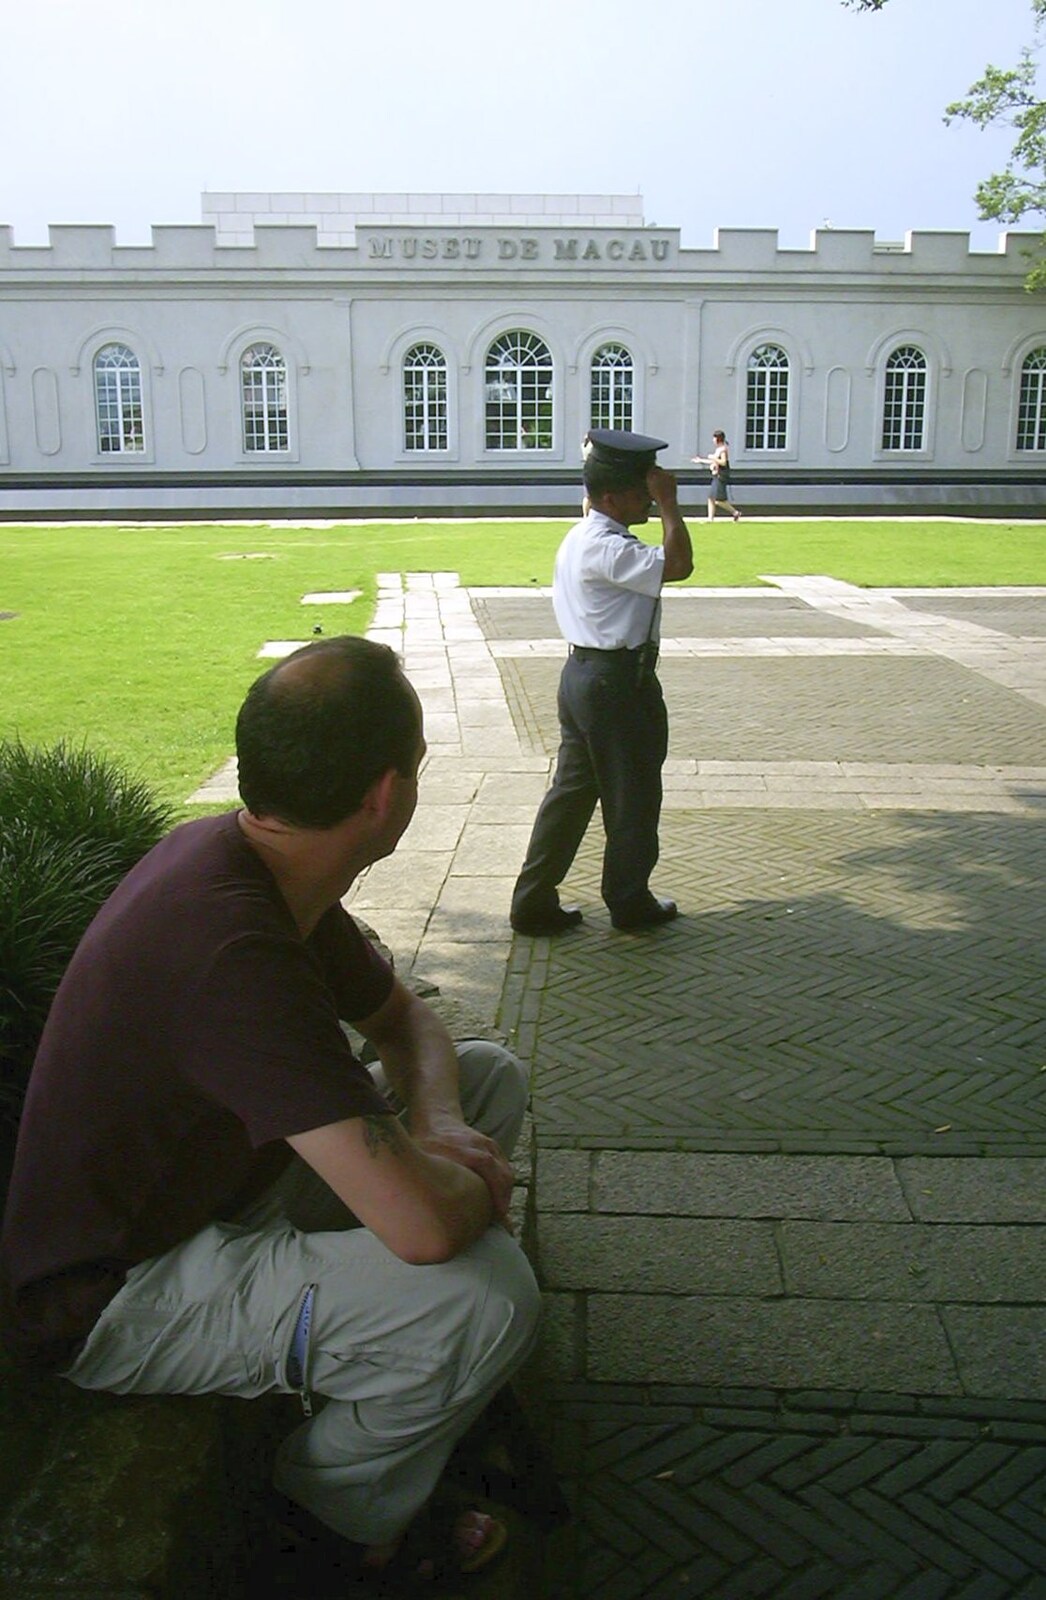 A Day Trip to Macau, China - 16th August 2001: DH watches a security guard wander around